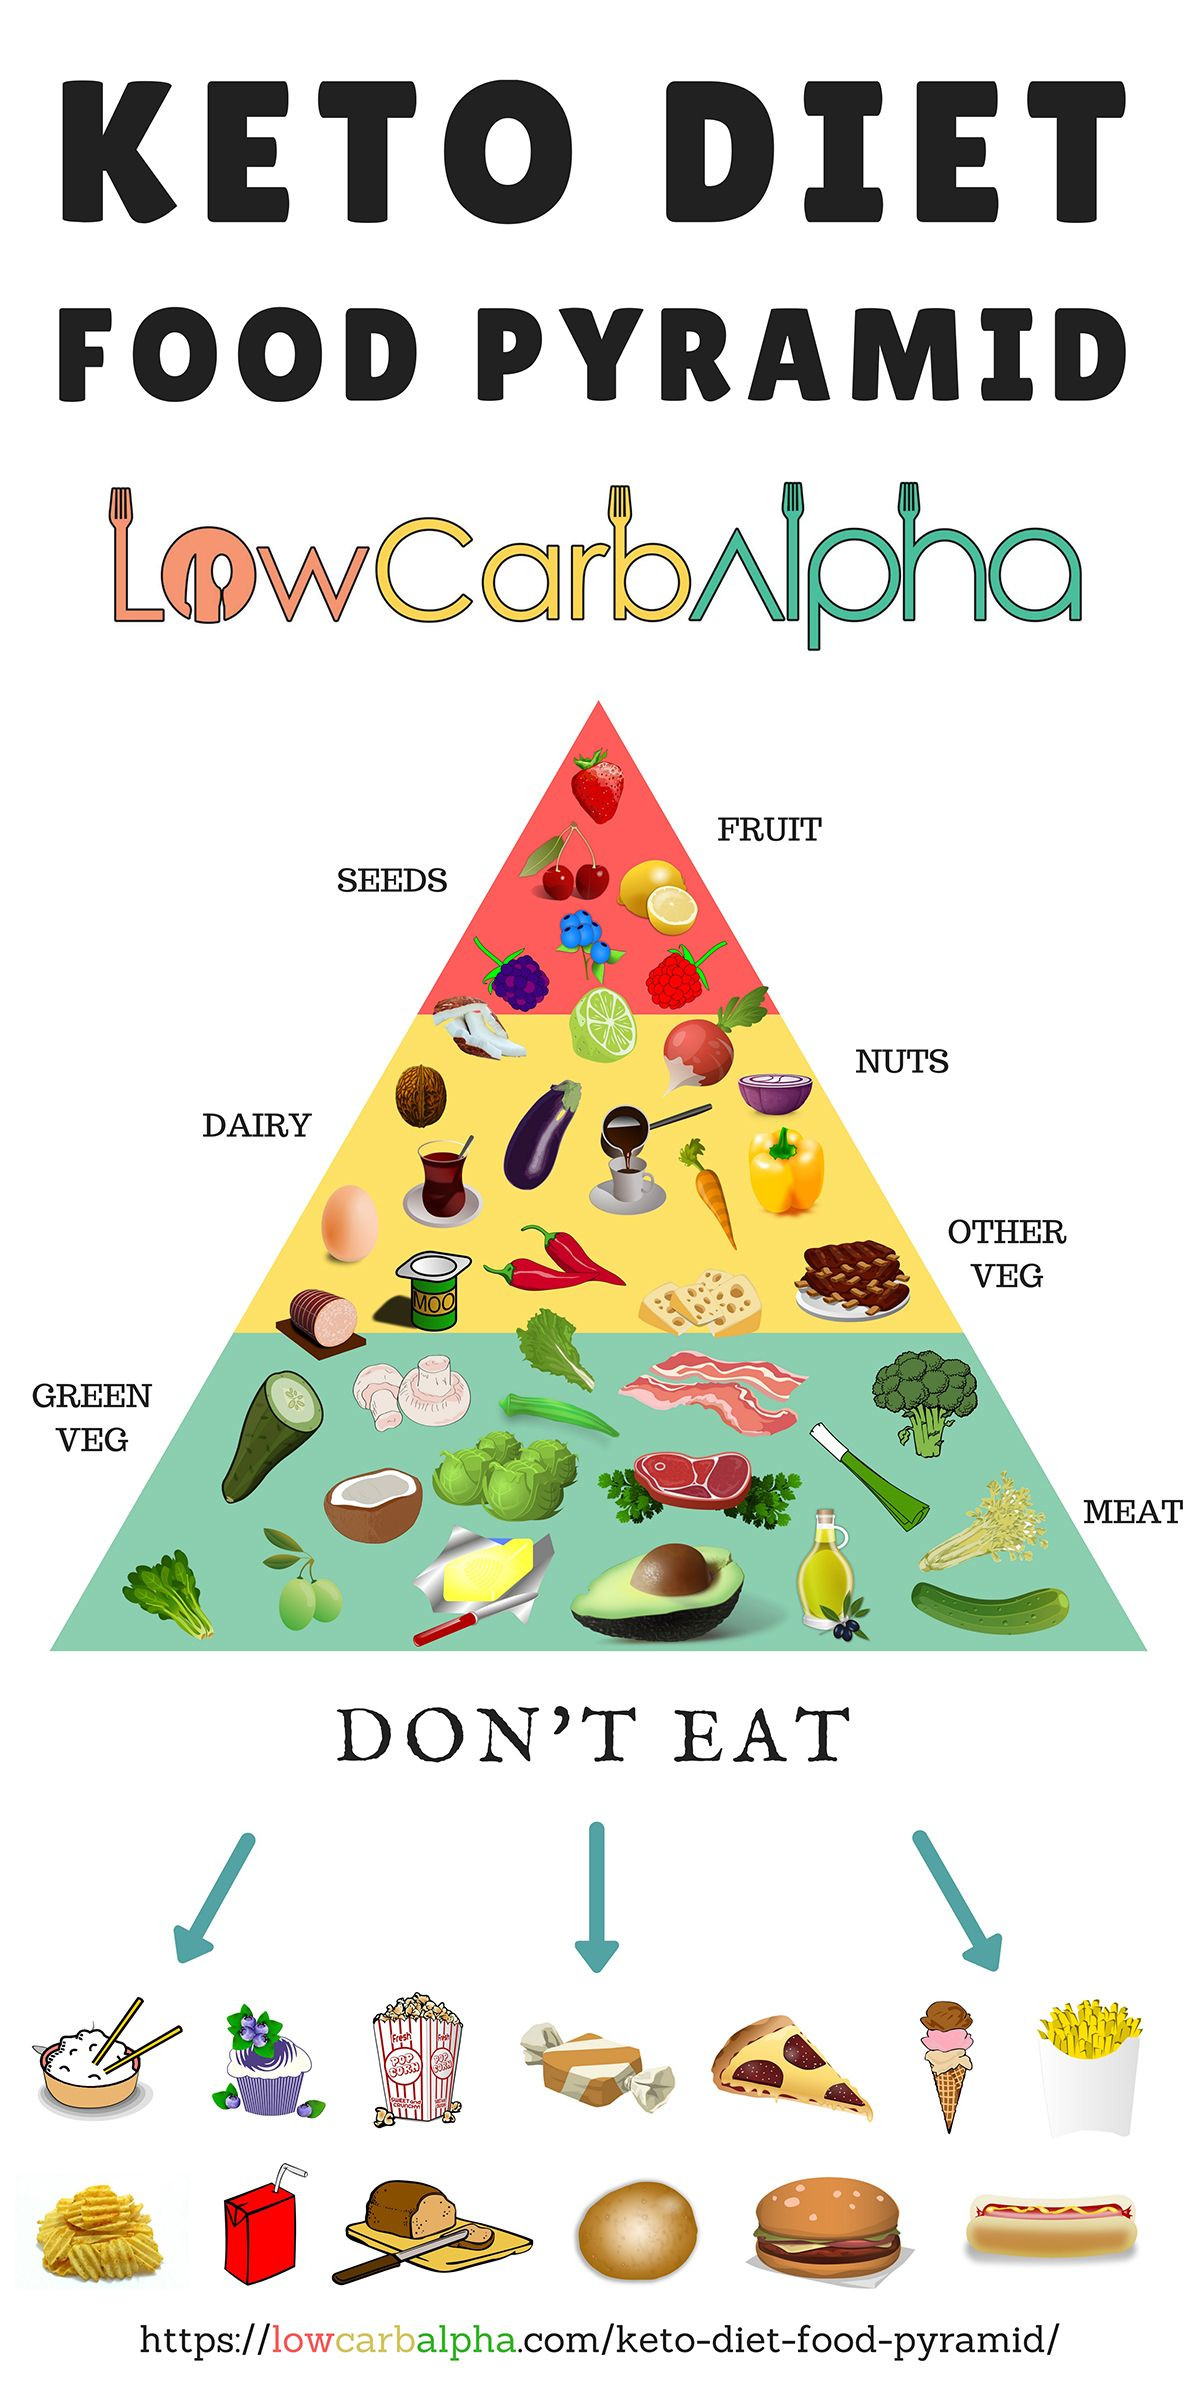 Keto Diet Food Pyramid
 What Is The Keto Diet Food Pyramid [Infographic] What To